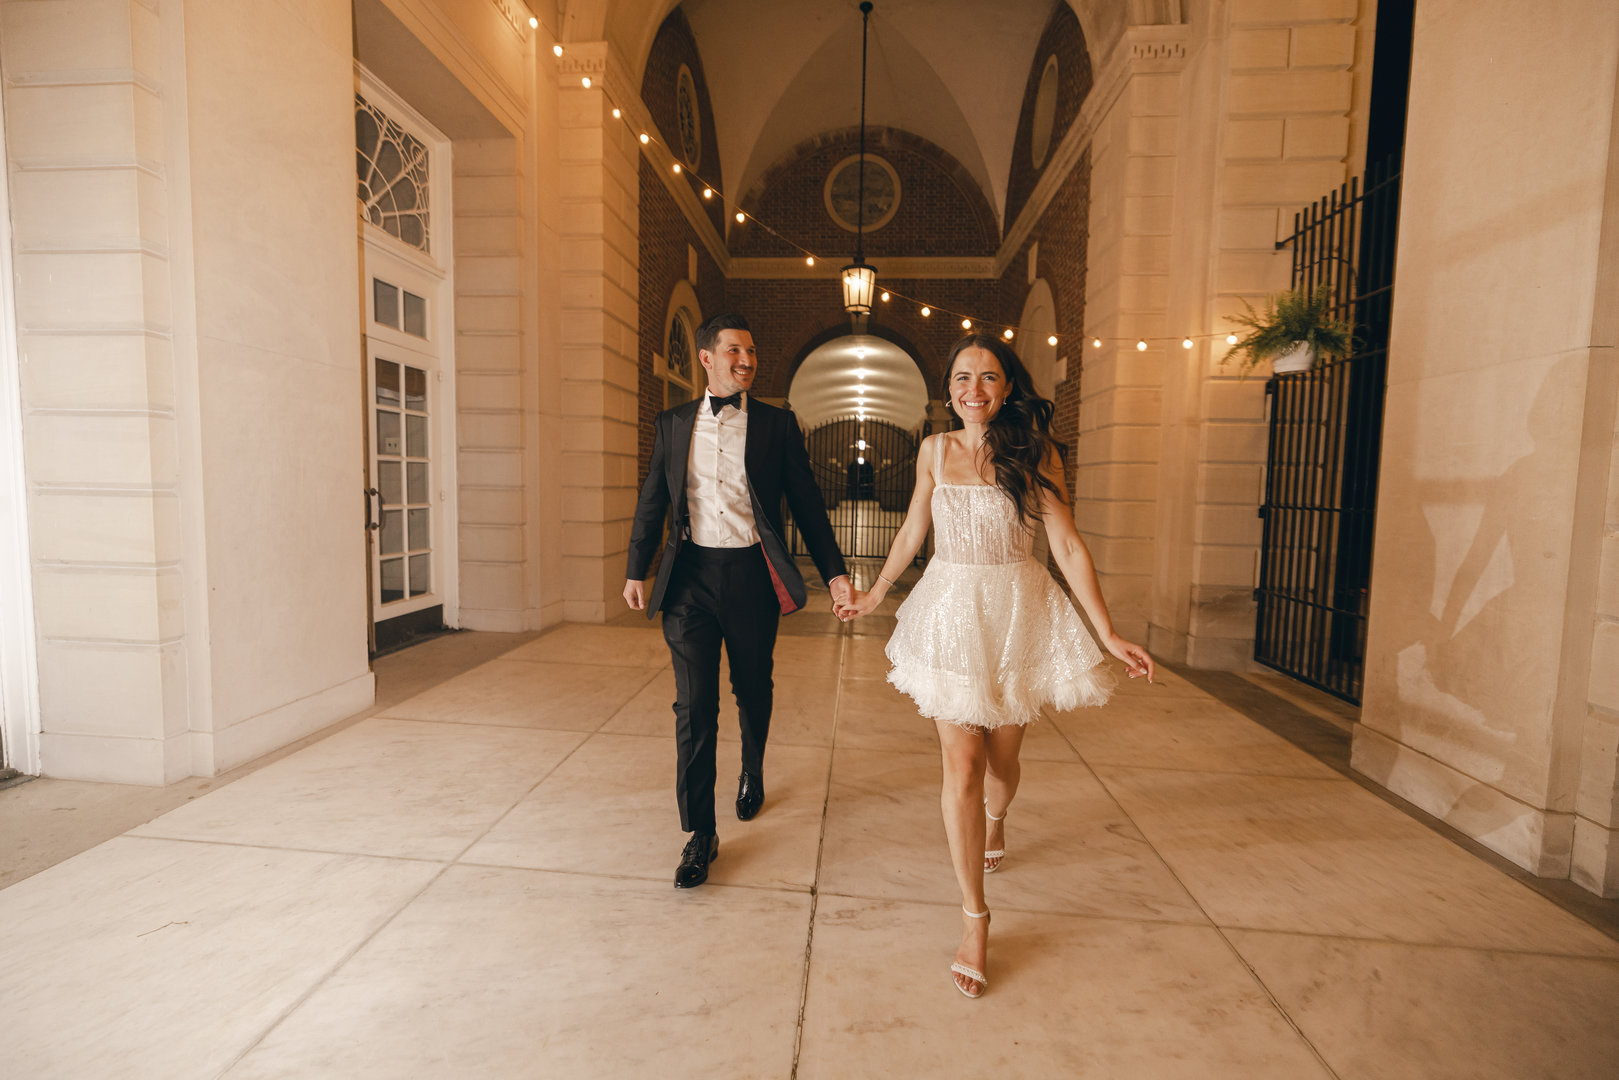 Bridal Jumpsuits and Short Dresses at Wedding Receptions are a fun new wedding trend for 2022 as shown by this bride in her short white dress leading her groom.